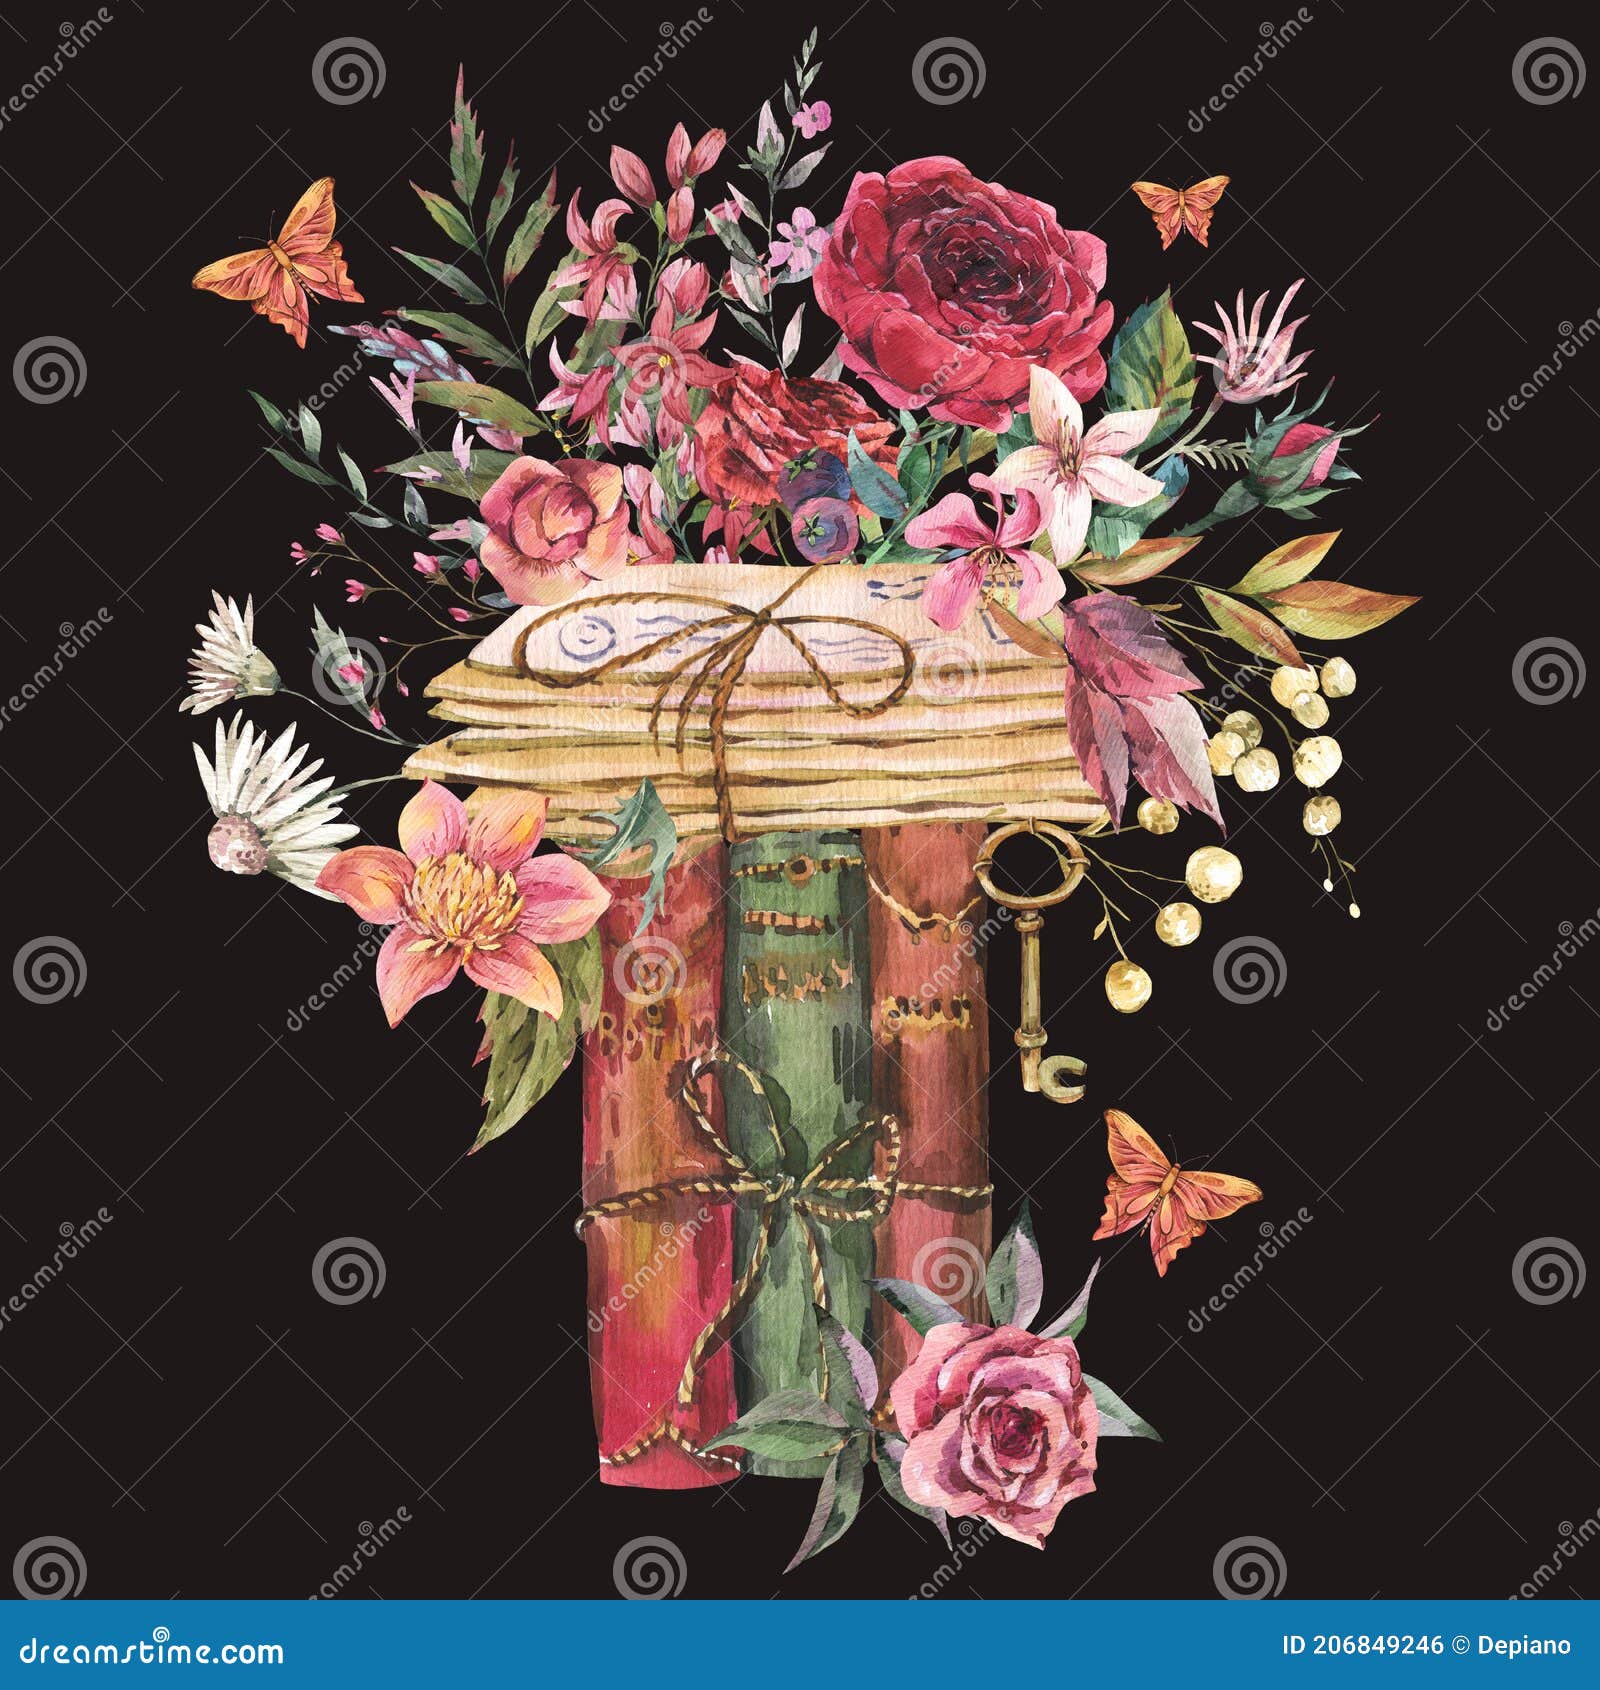 vintage old books with flowers. natural greeting card. dark academia floral 